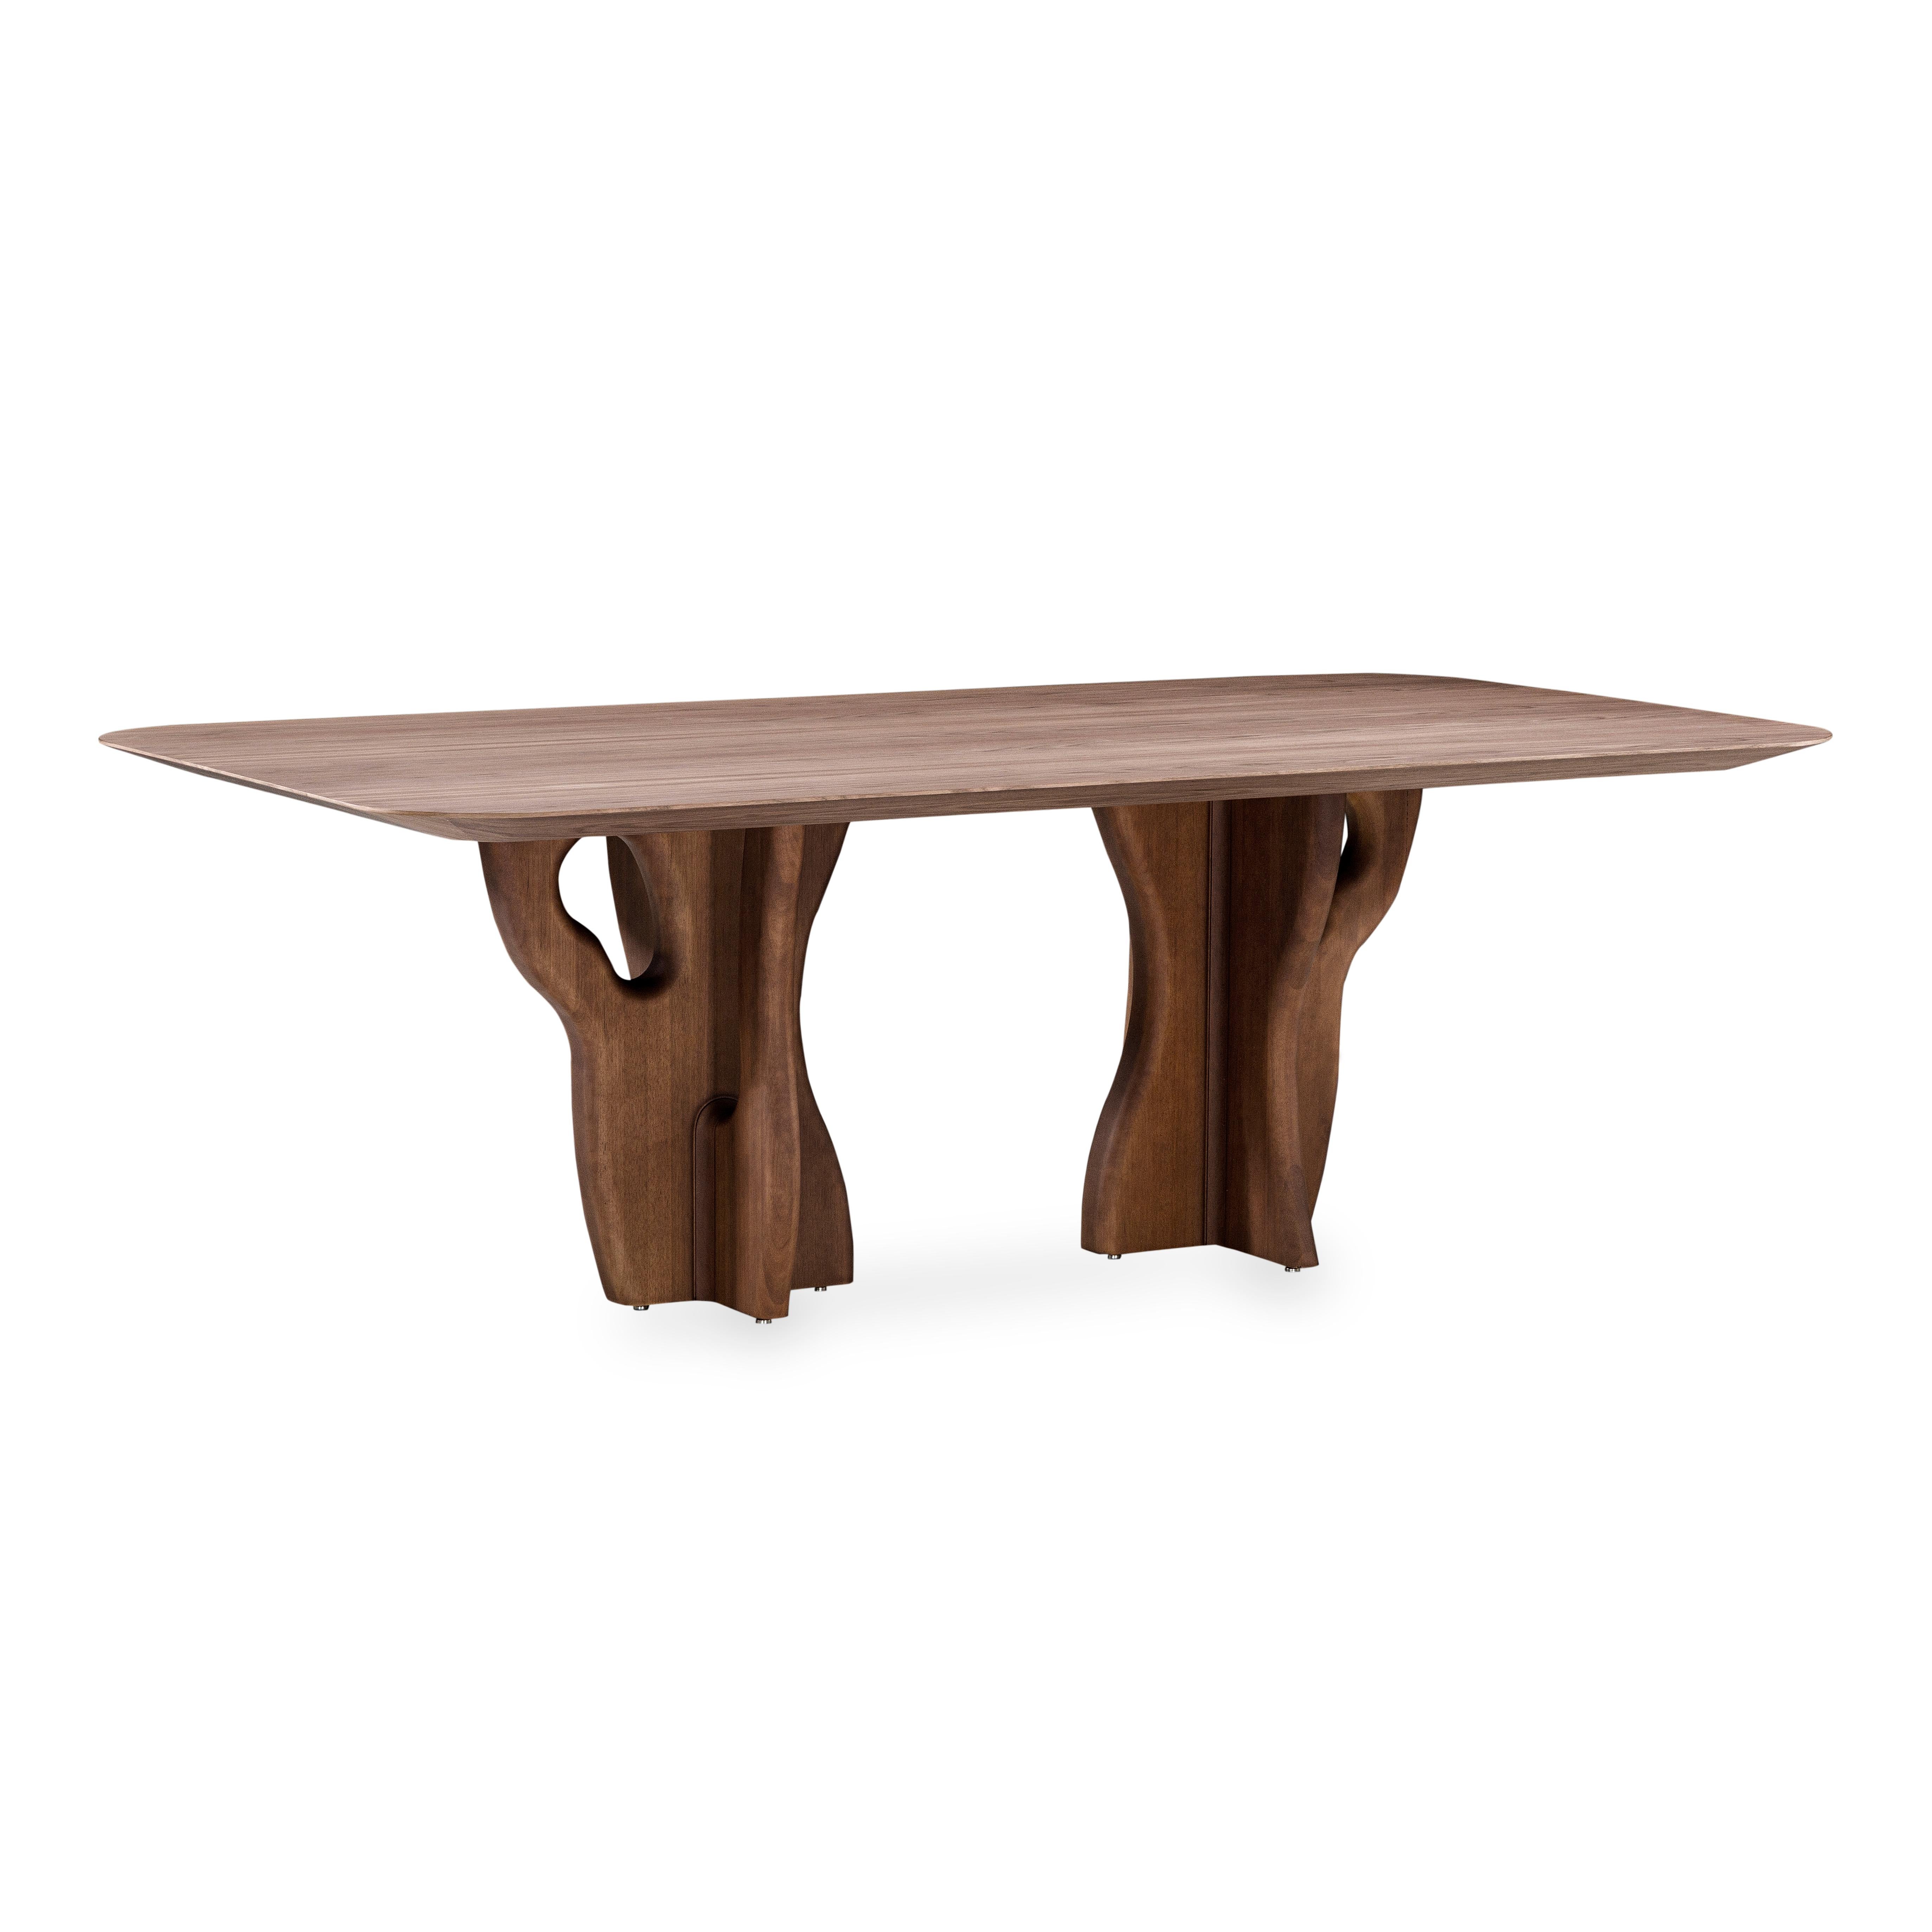 Uultis design team has manufactured the Suma dining table in a walnut veneered finish top with organic solid wood legs, perfect for your dreamed dining space. This is a piece that is designed to be used during meals and gatherings, and it is also